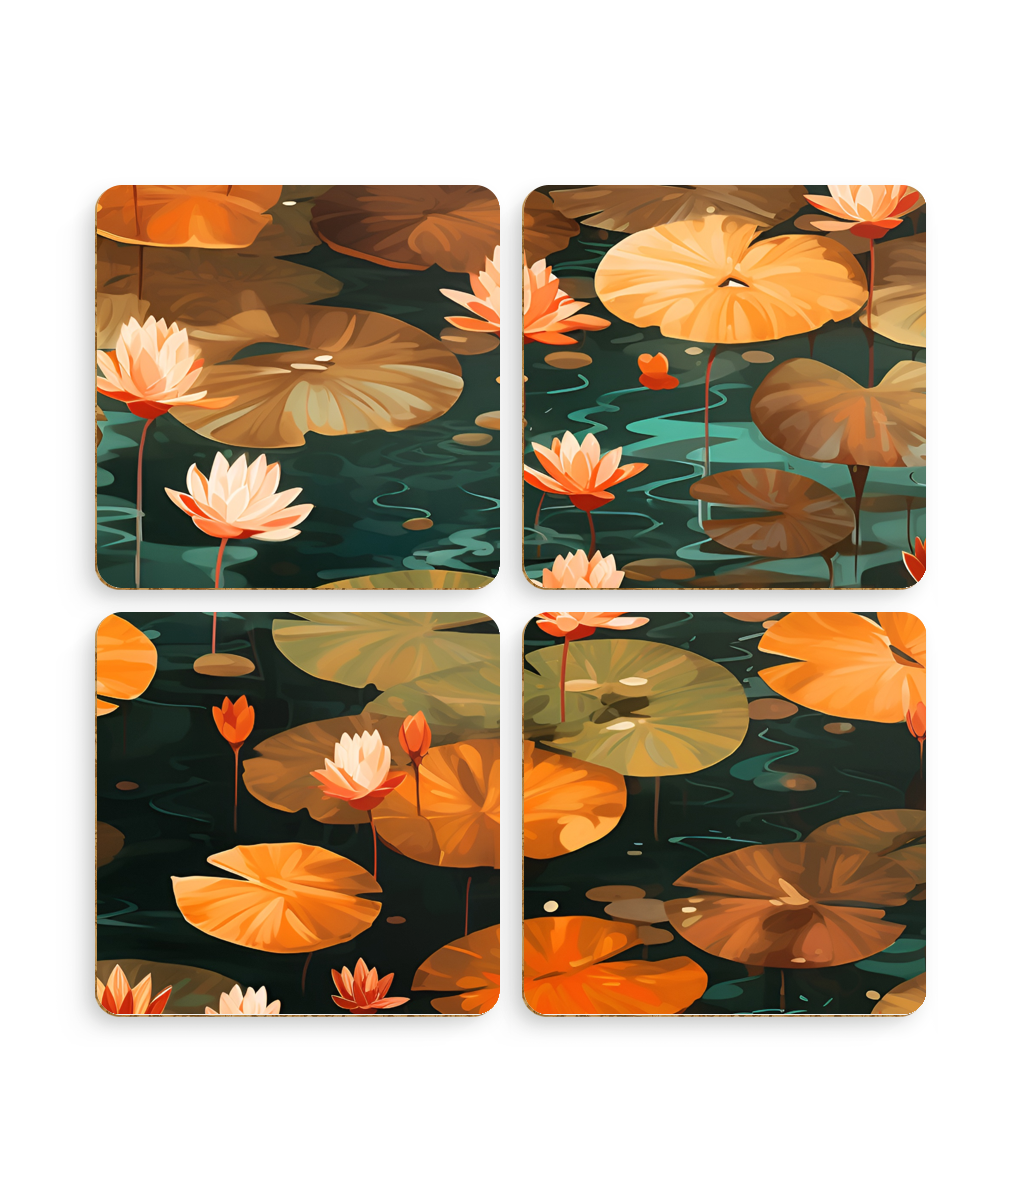 Orange Lotus Whisper: Autumn on the Water - Pack of 4 Coasters